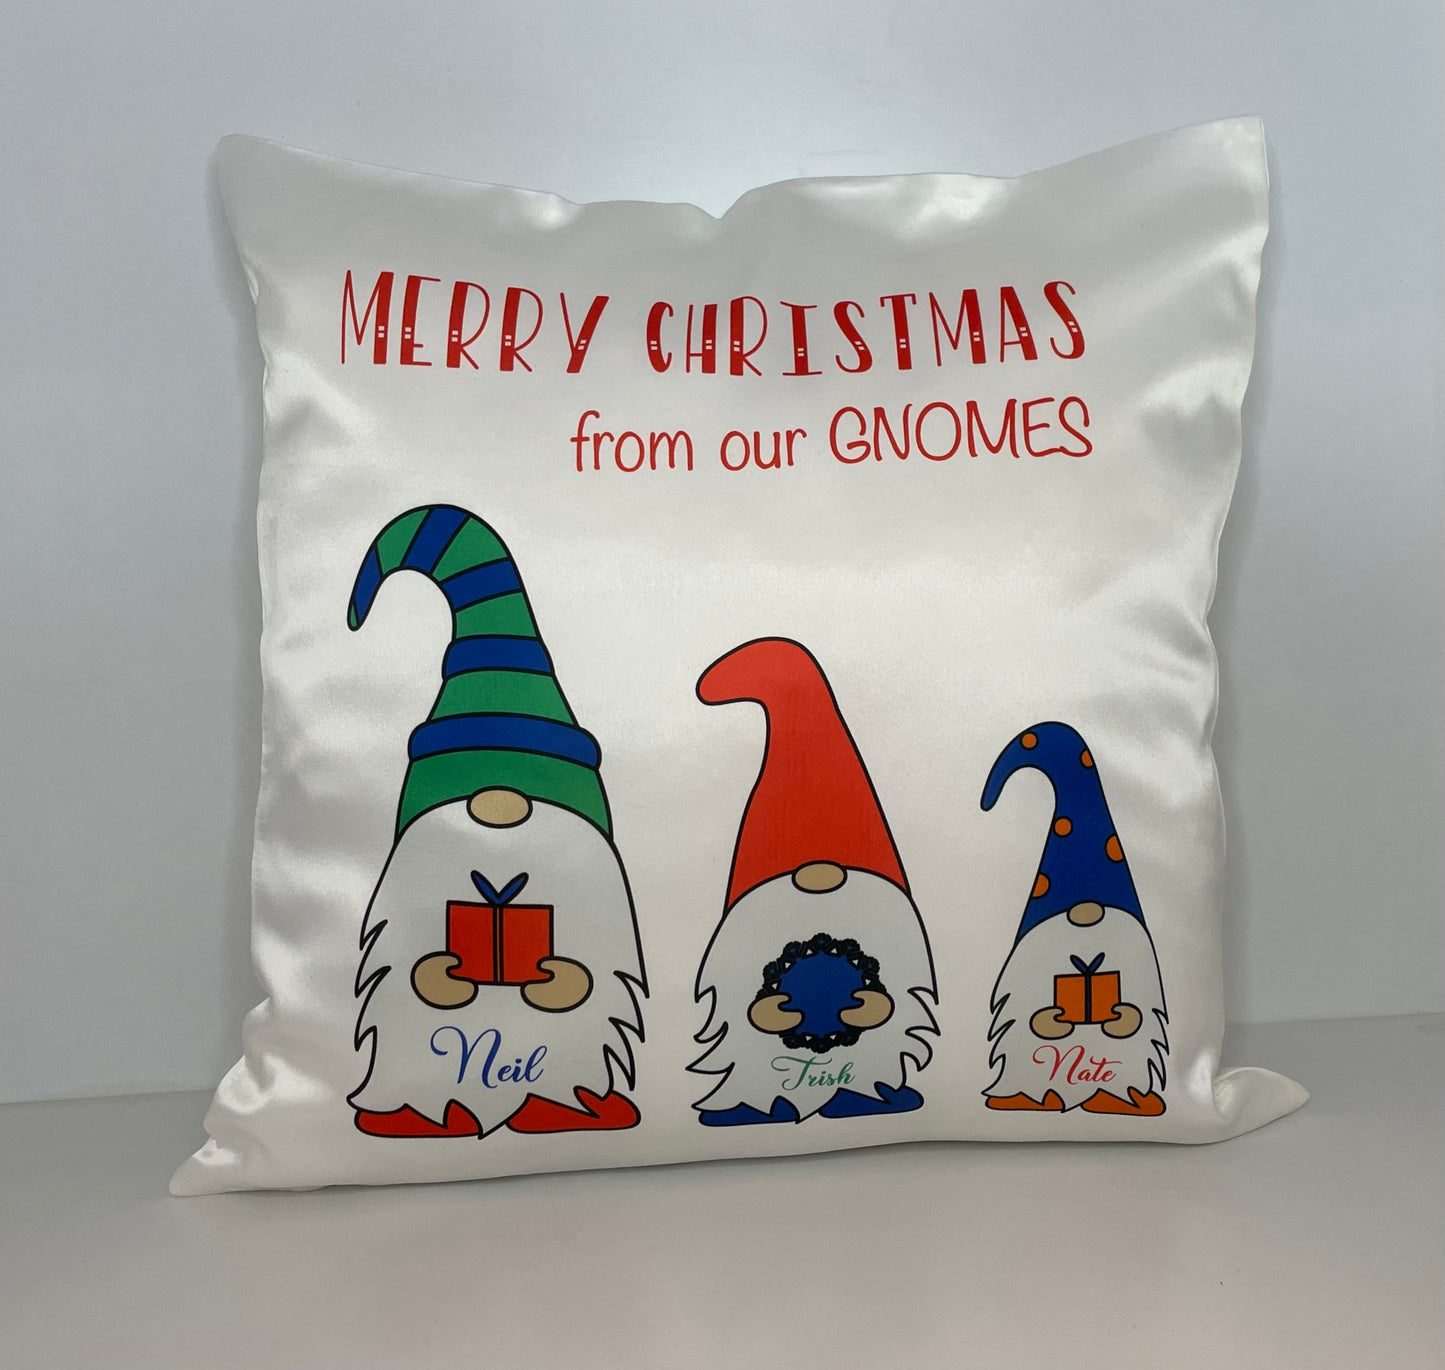 Personalized Christmas Pillows | Customize it your way